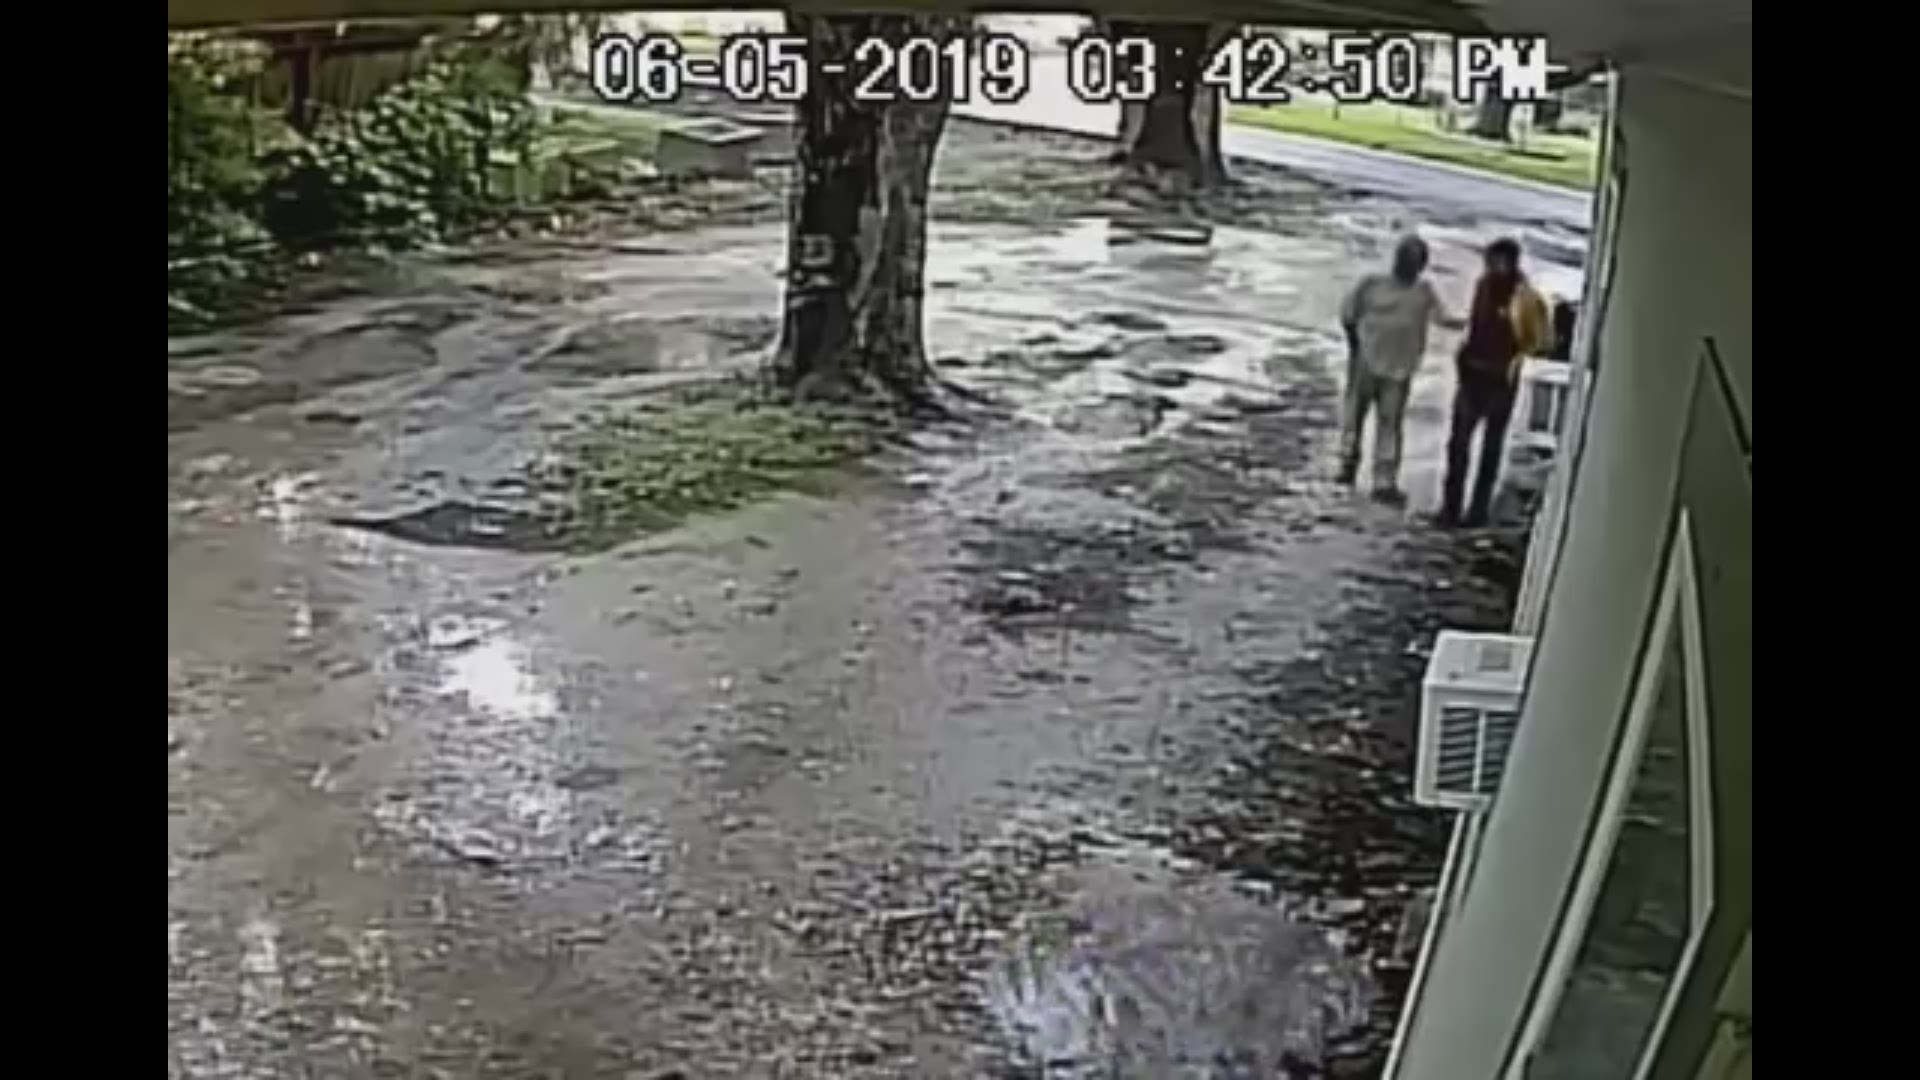 Crime Stoppers and the Houston Police Department's Robbery Division need help identifying the suspect who beat and robbed an elderly man. Warning: some reader's may find the video disturbing, but police hope it will lead to an arrest. | https://www.khou.com/article/news/crime/graphic-video-shows-89-year-old-man-getting-beaten-houston-police-looking-for-suspect/285-fe5d5e46-5bdb-4dc5-9579-8b764324ec22